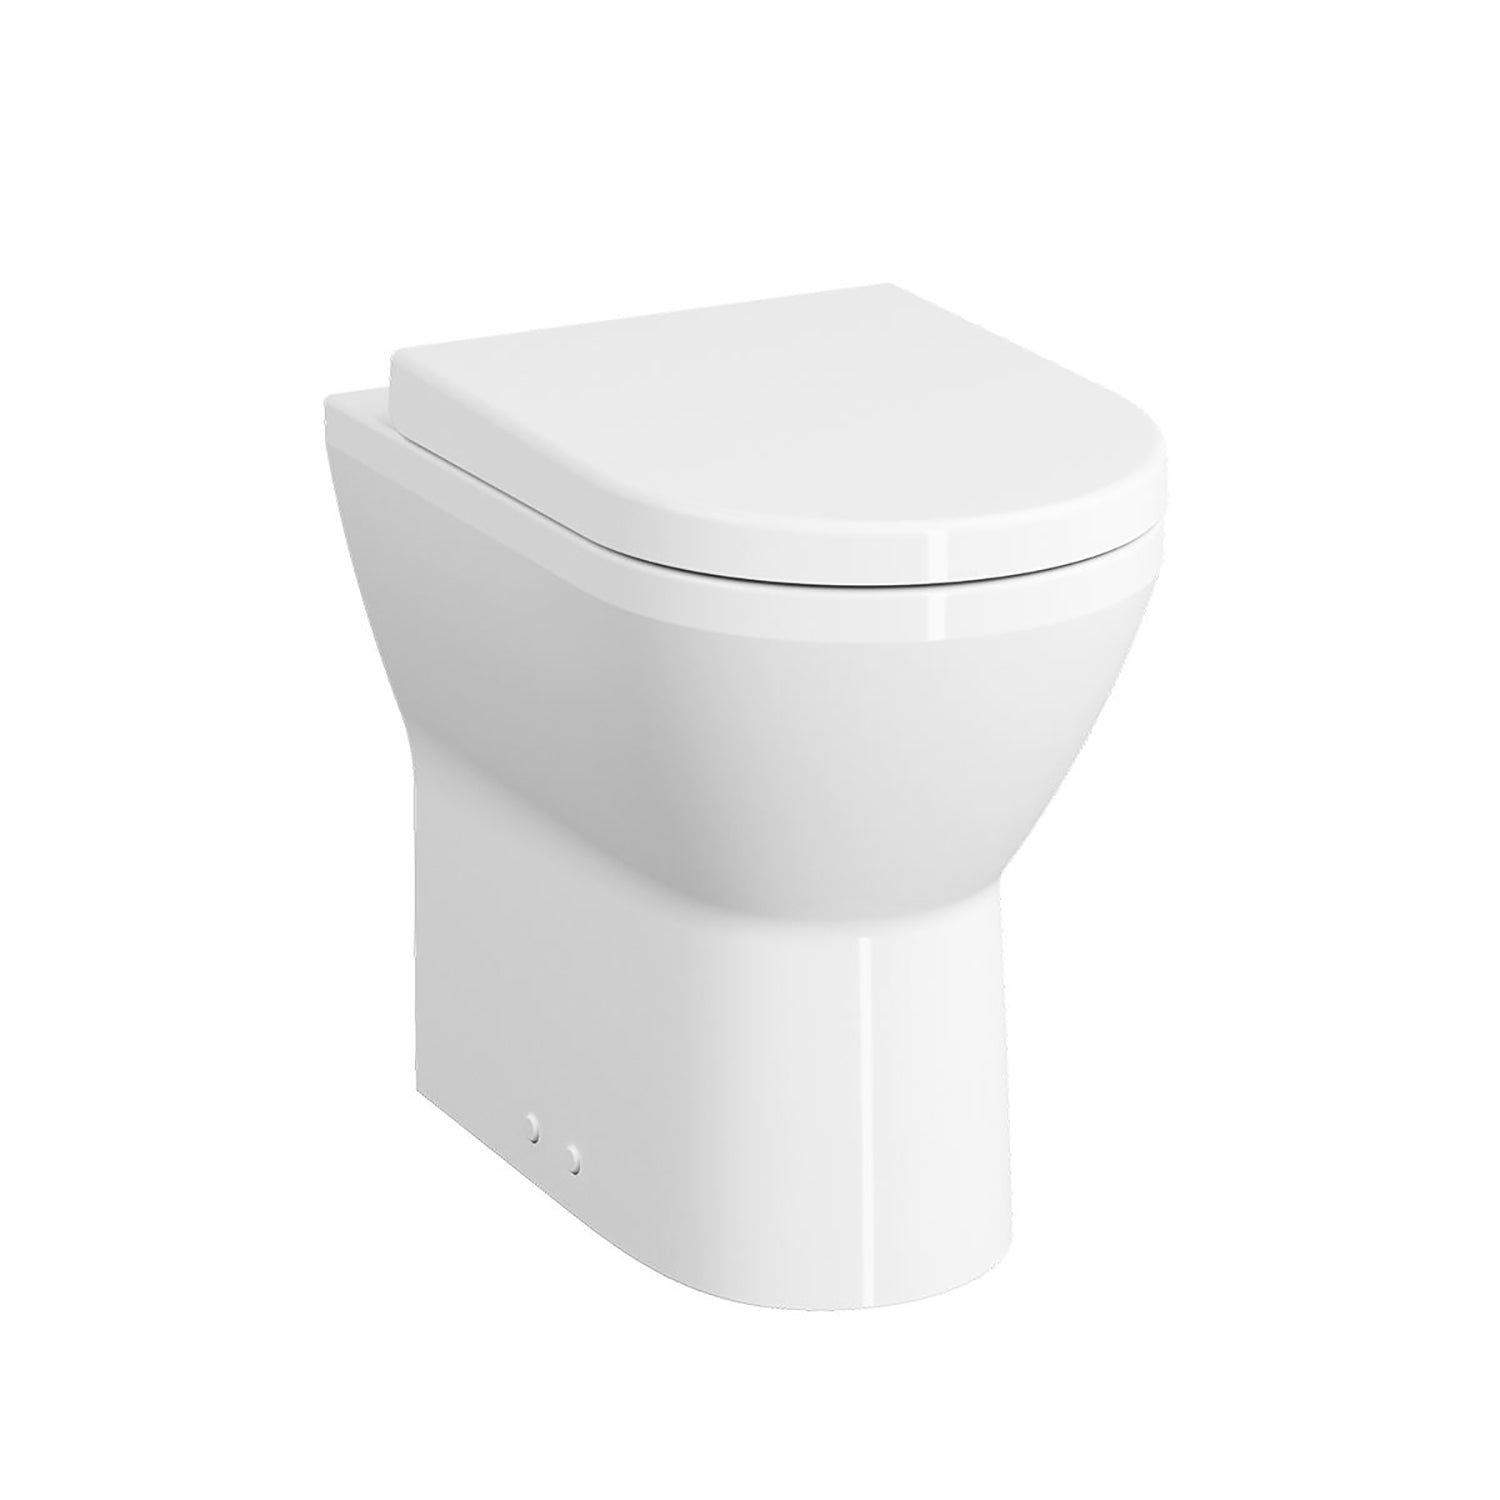 Vesta comfort height back to wall toilet in a white finish, 480mm with seat and cover not included on a white background.